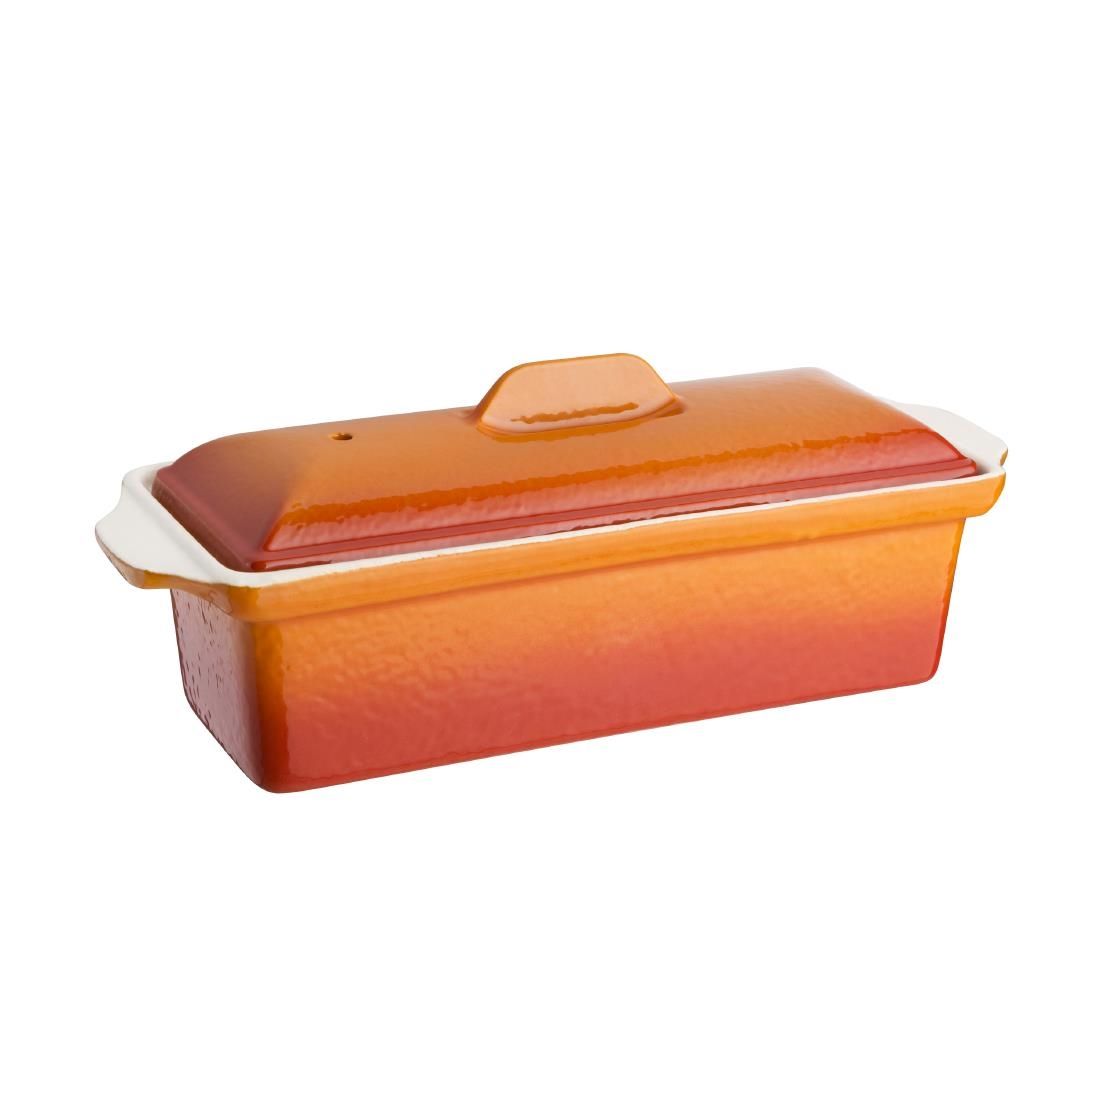 Vogue Orange Pate Terrine Mould 1.3Ltr - W455 Oven to Table Vogue   